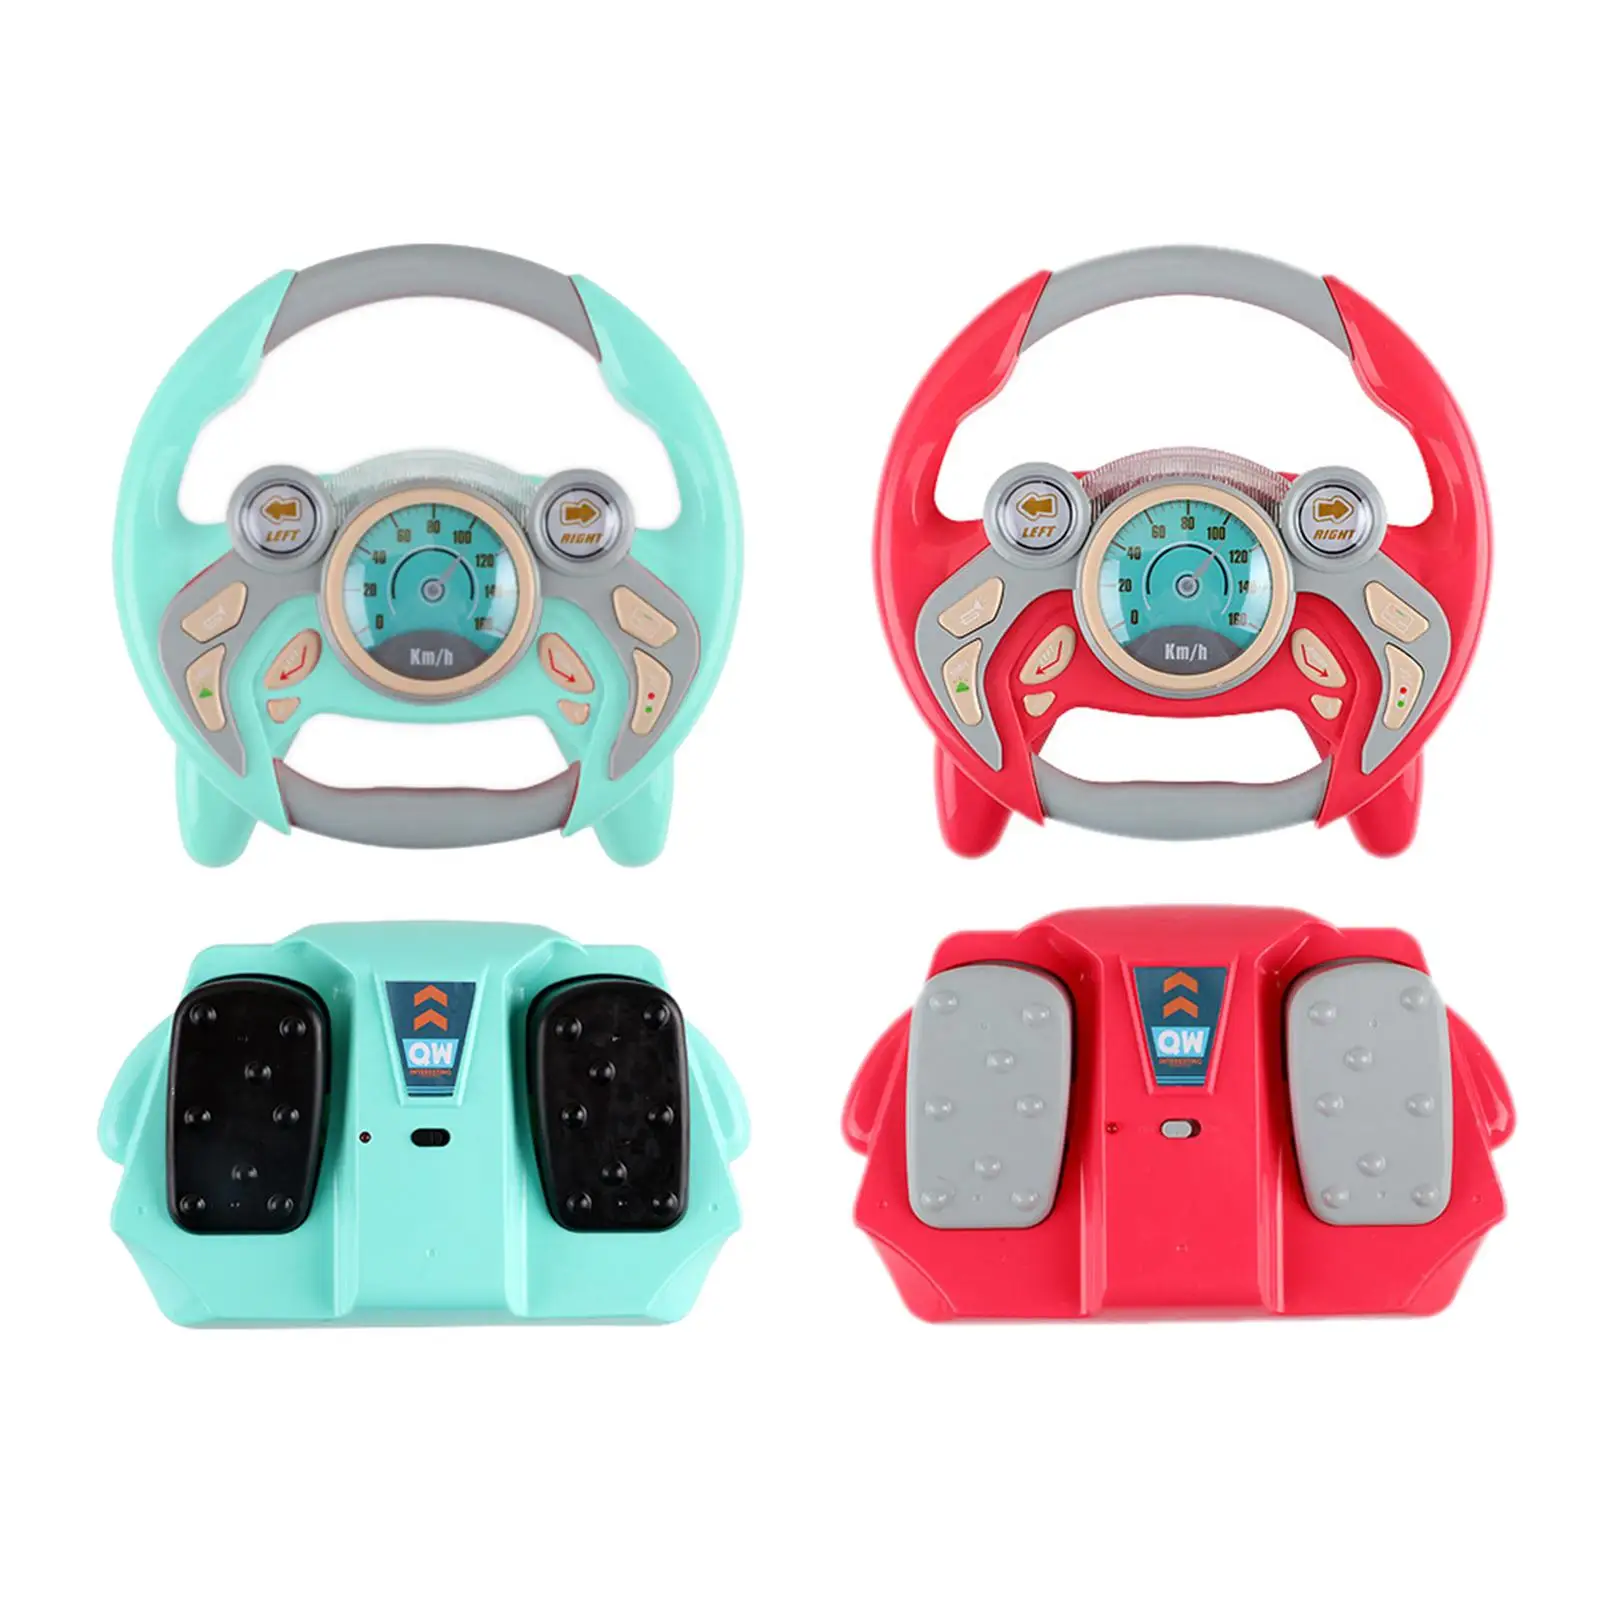 Simulated Steering Wheel for Kids Children Car Toy Gift Interactive Toys